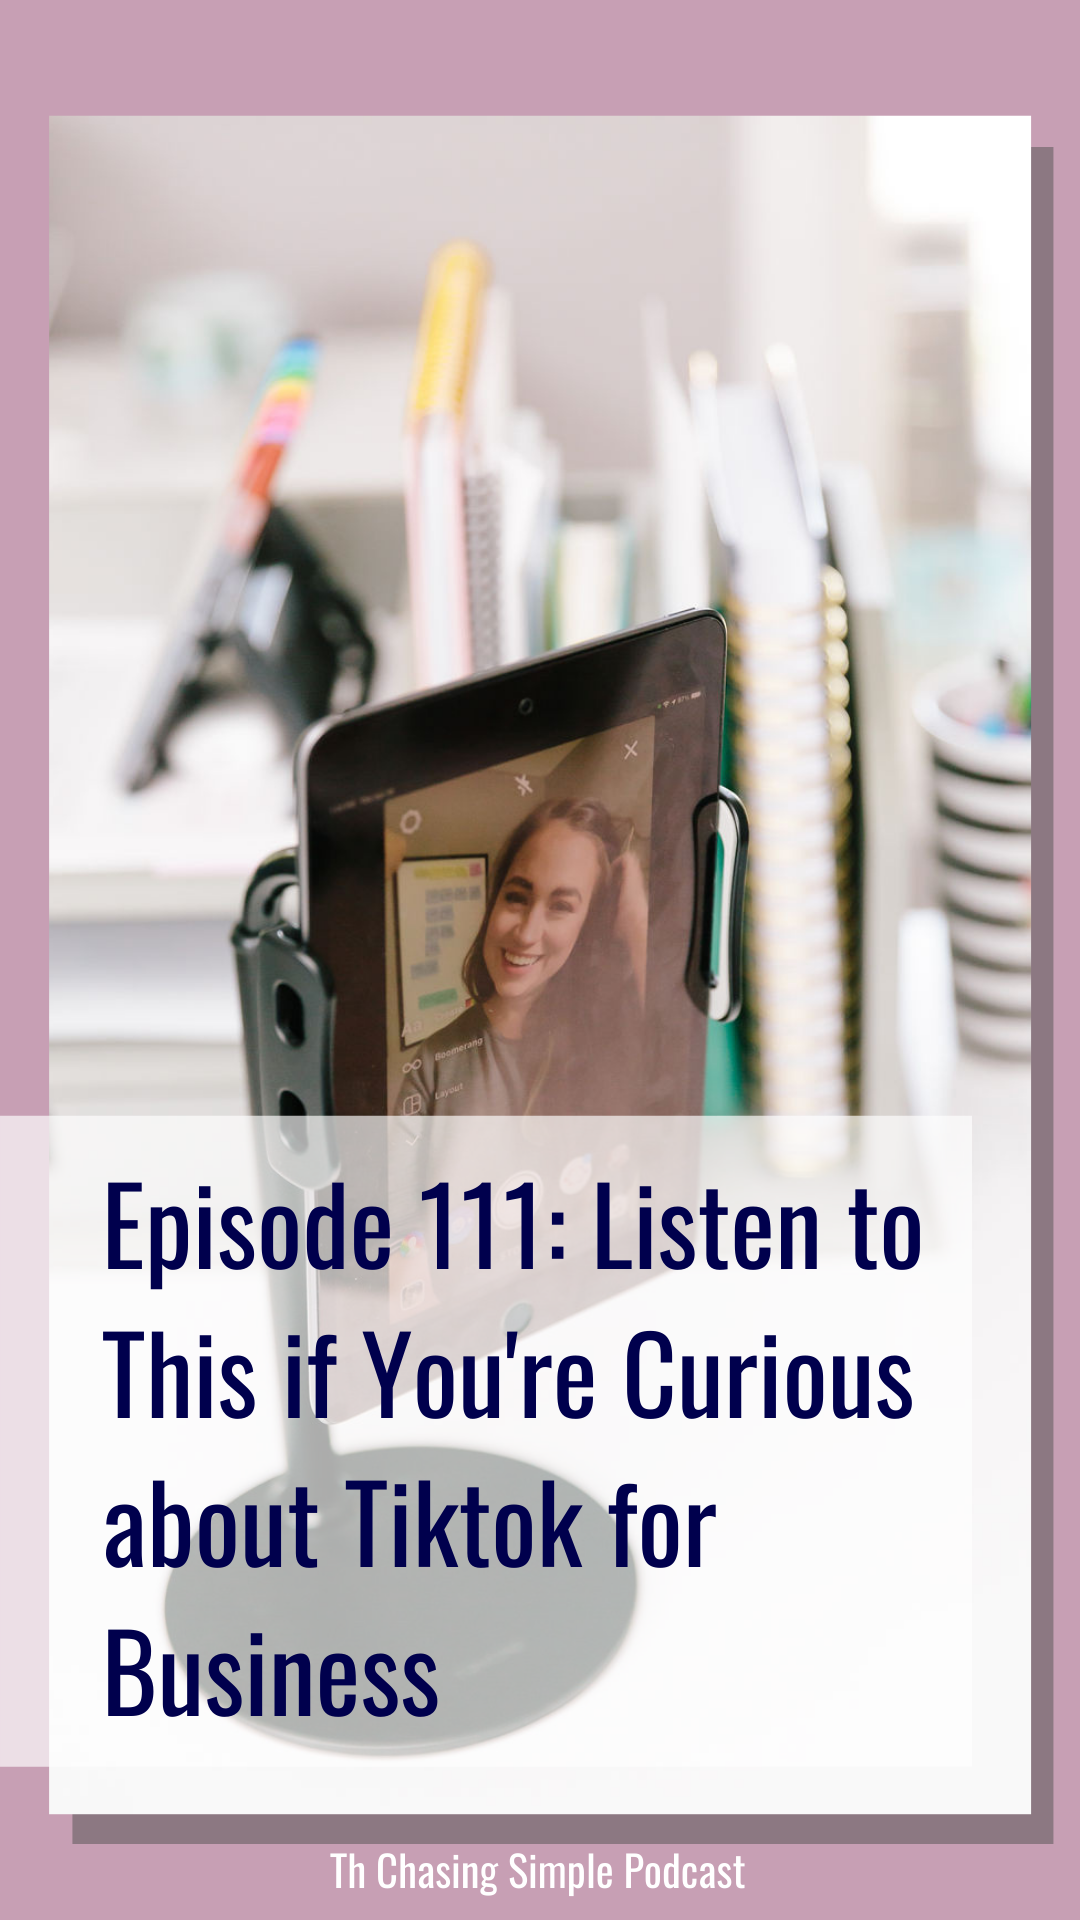 I experimented with Tiktok for small business so that you didn't have to! Listen in and learn the lessons I uncovered during my experiment.